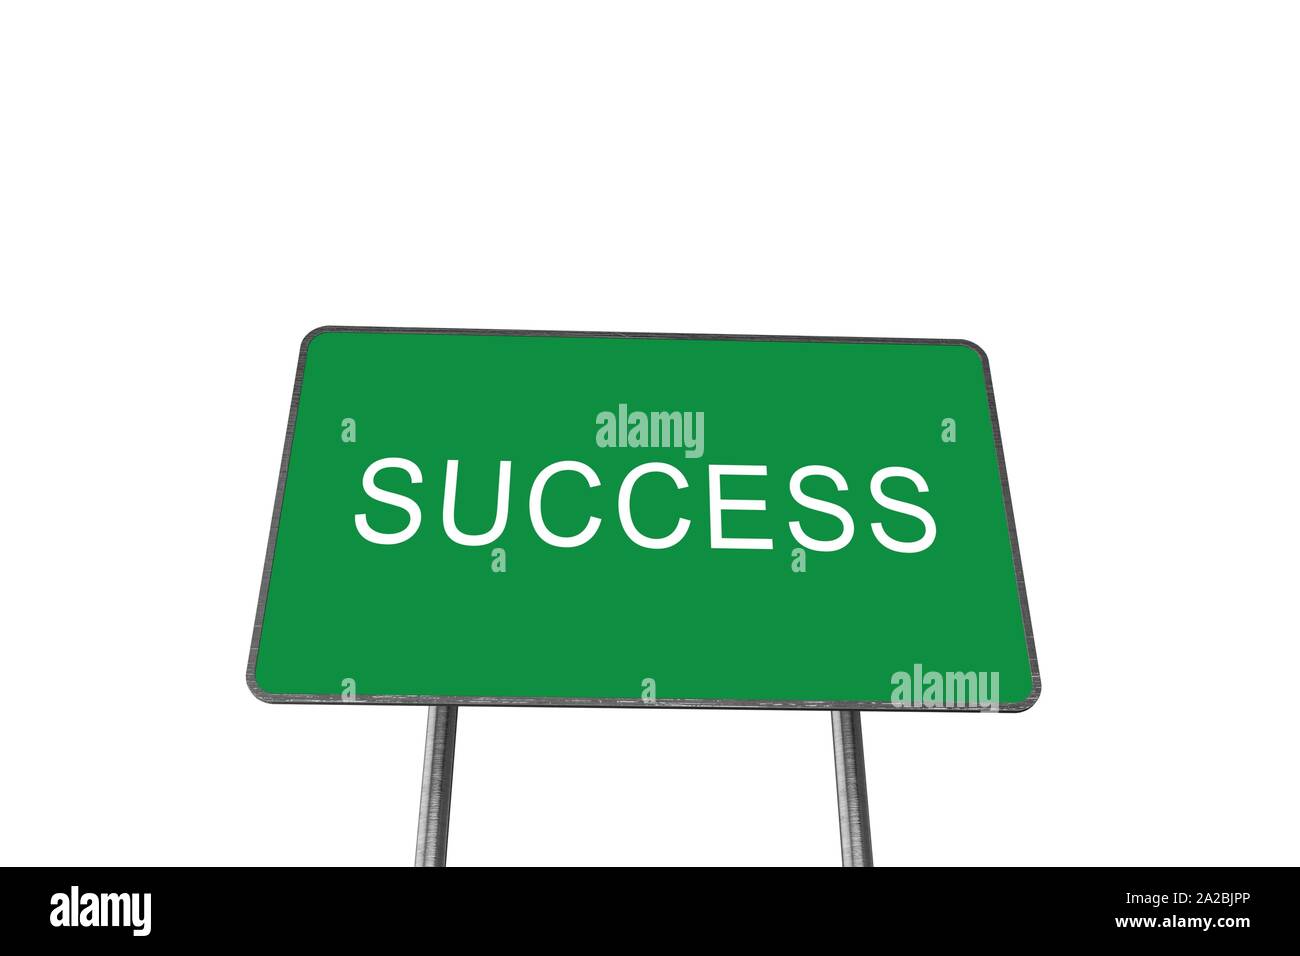 Success Green Road Sign Isolated On White Background. Business Concept 3D Rendering. Stock Photo